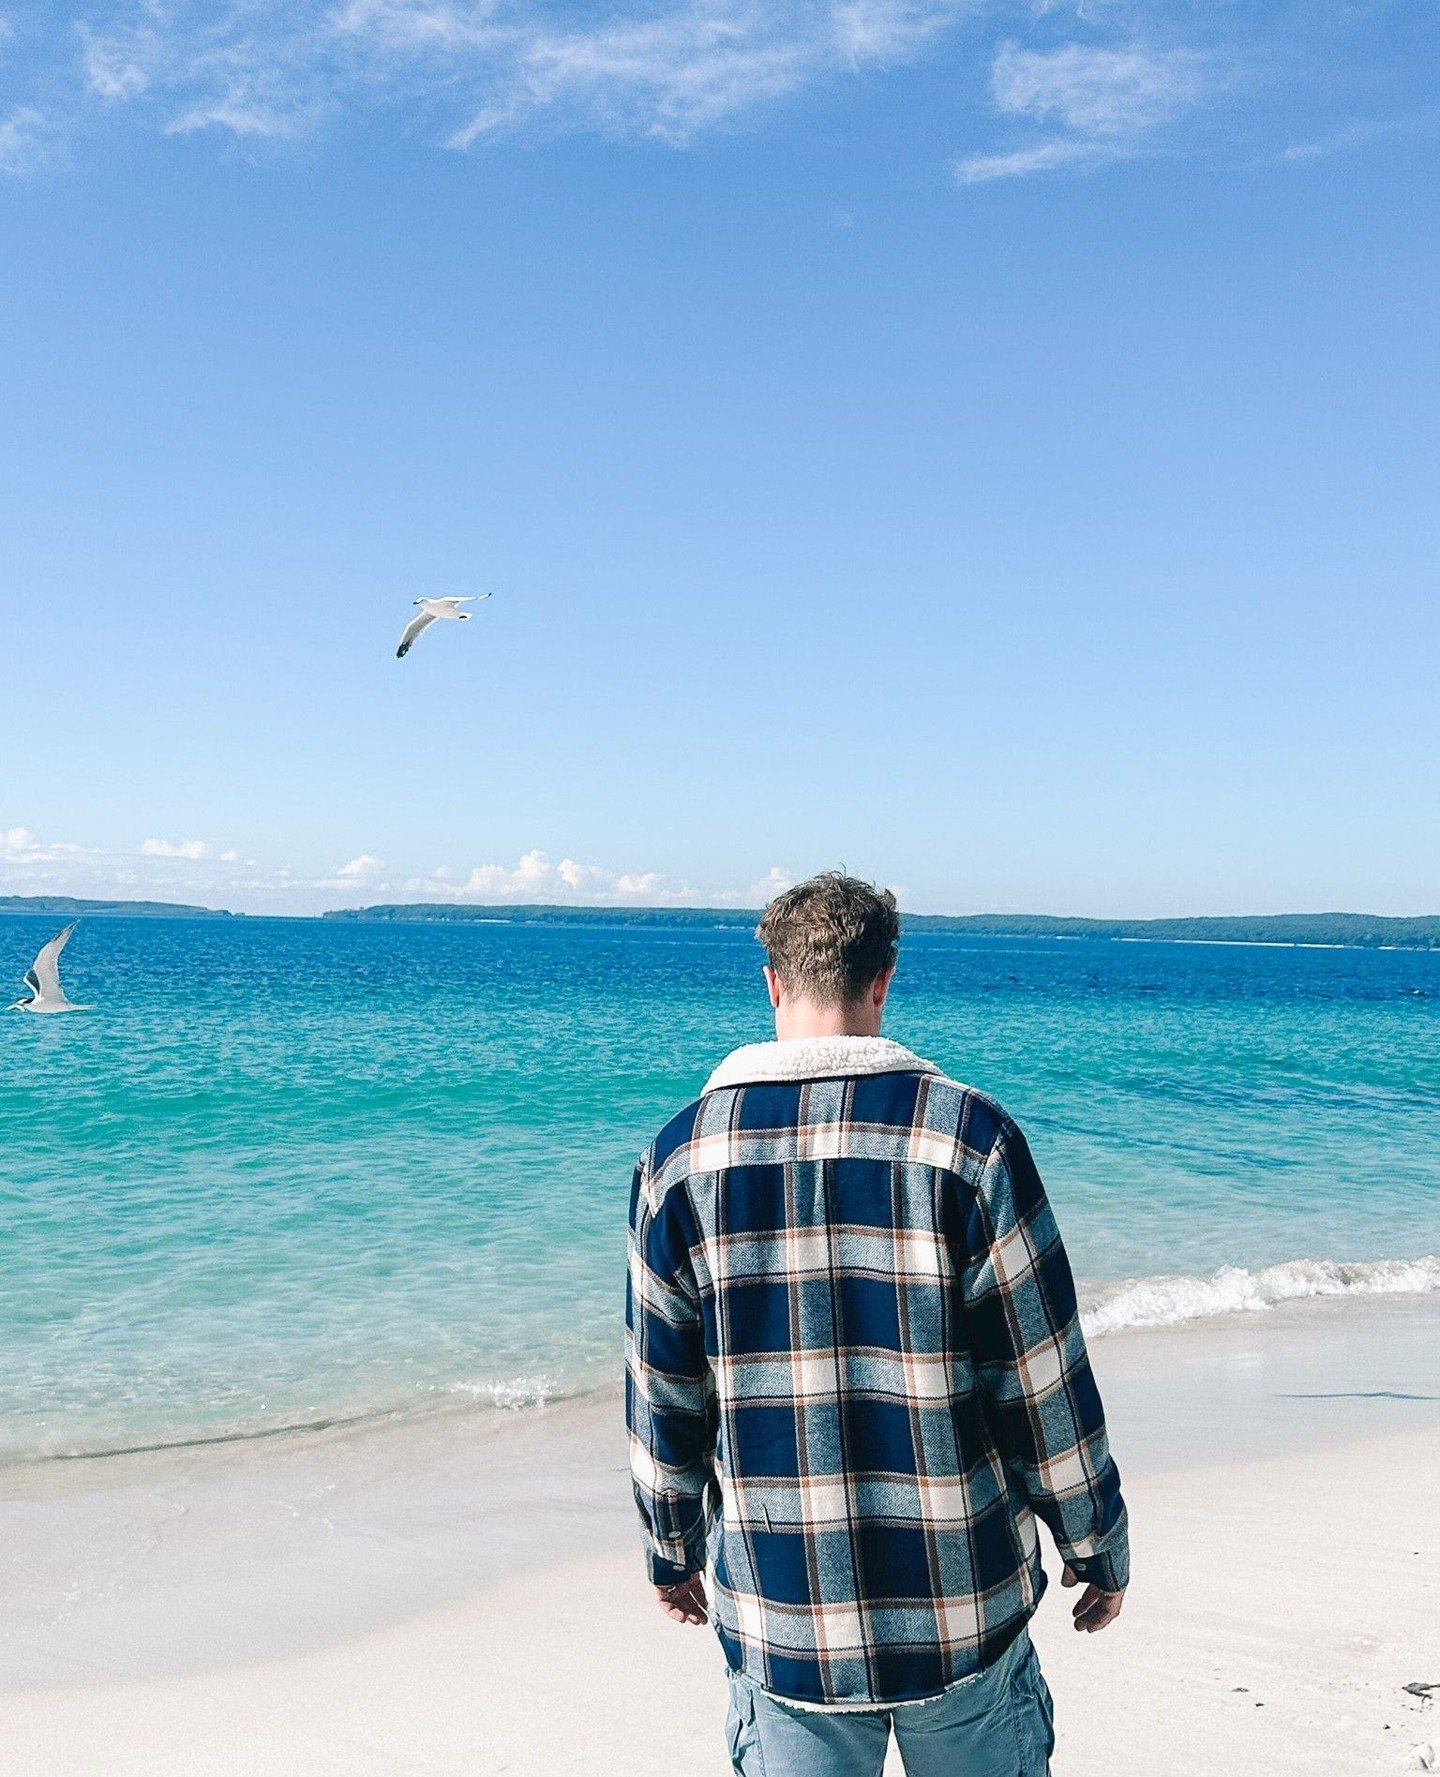 Weekend get aways down south never disappoint 🏖️⁠
⁠
⁠
⁠
#weekendvibes #travels #getaway #beachlife #sunshine #australia #flanno #menswear #sustainablesurfwear #sustainableclothing #coastal #pipinghotaustralia #forcleanoceans #surf #southernhighlands